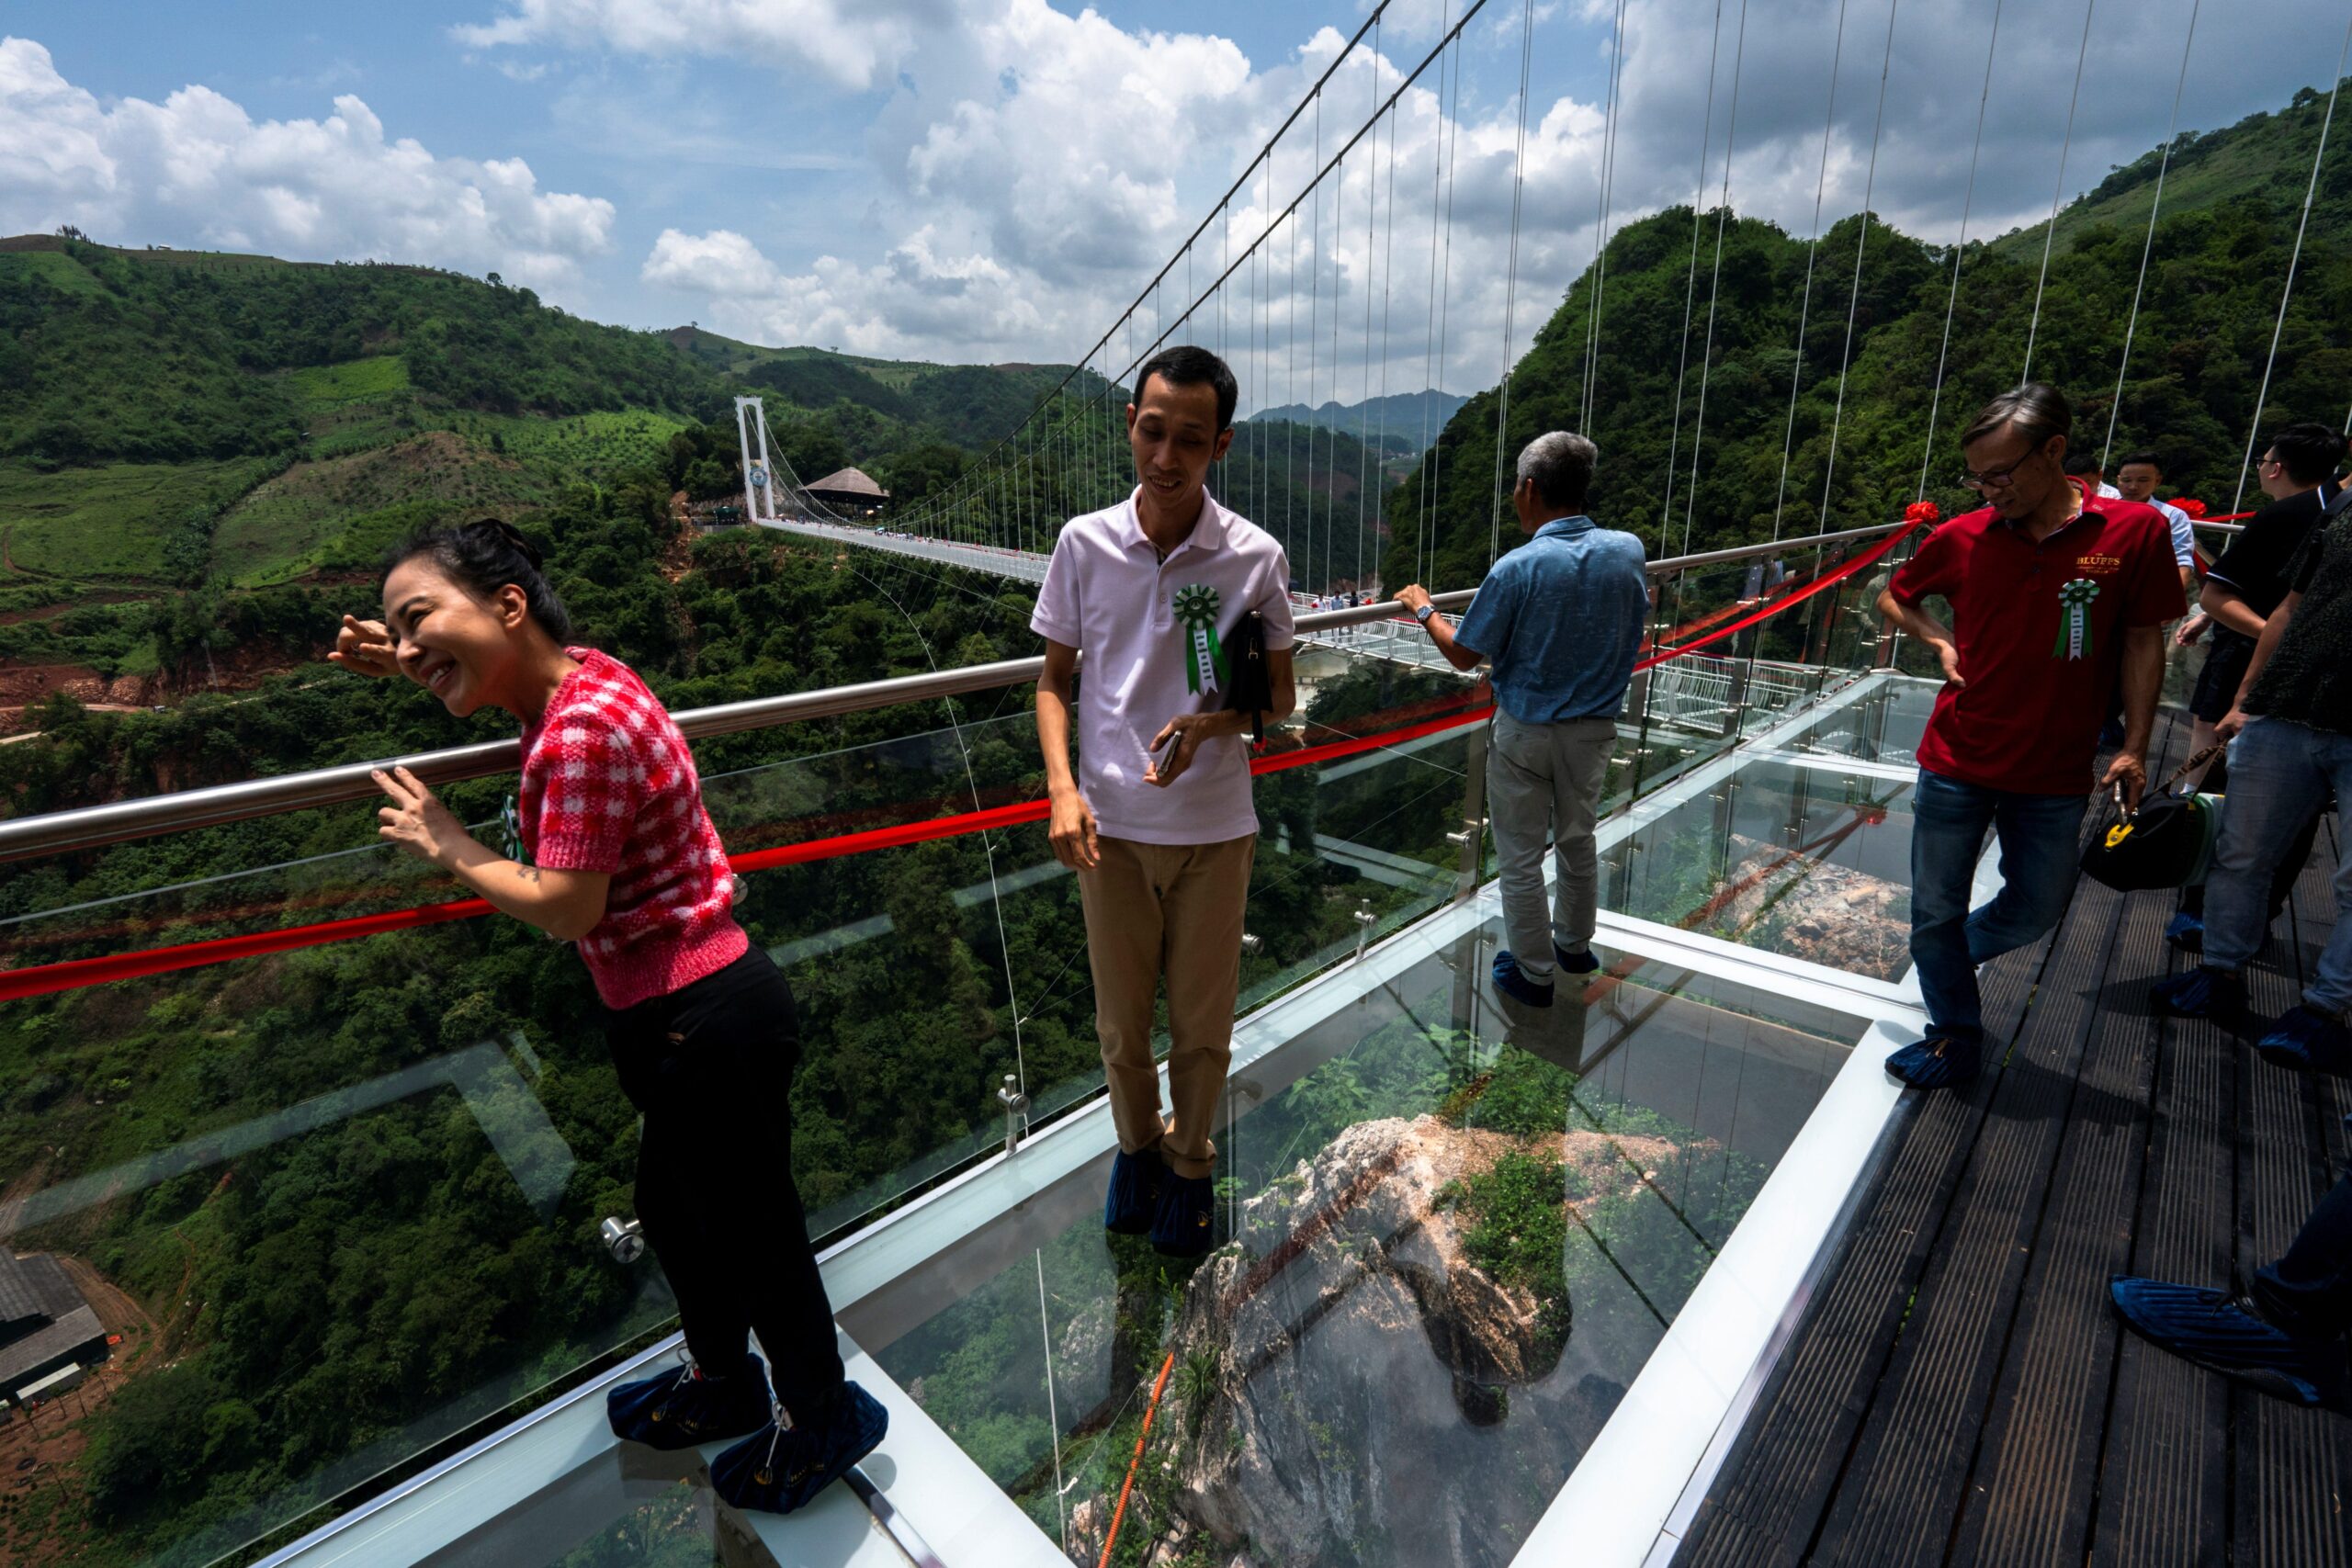 Workers clean the Bach Long glass bridge ahead of the opening ceremony at Moc Chau district in Son La province, Vietnam, May 28, 2022.